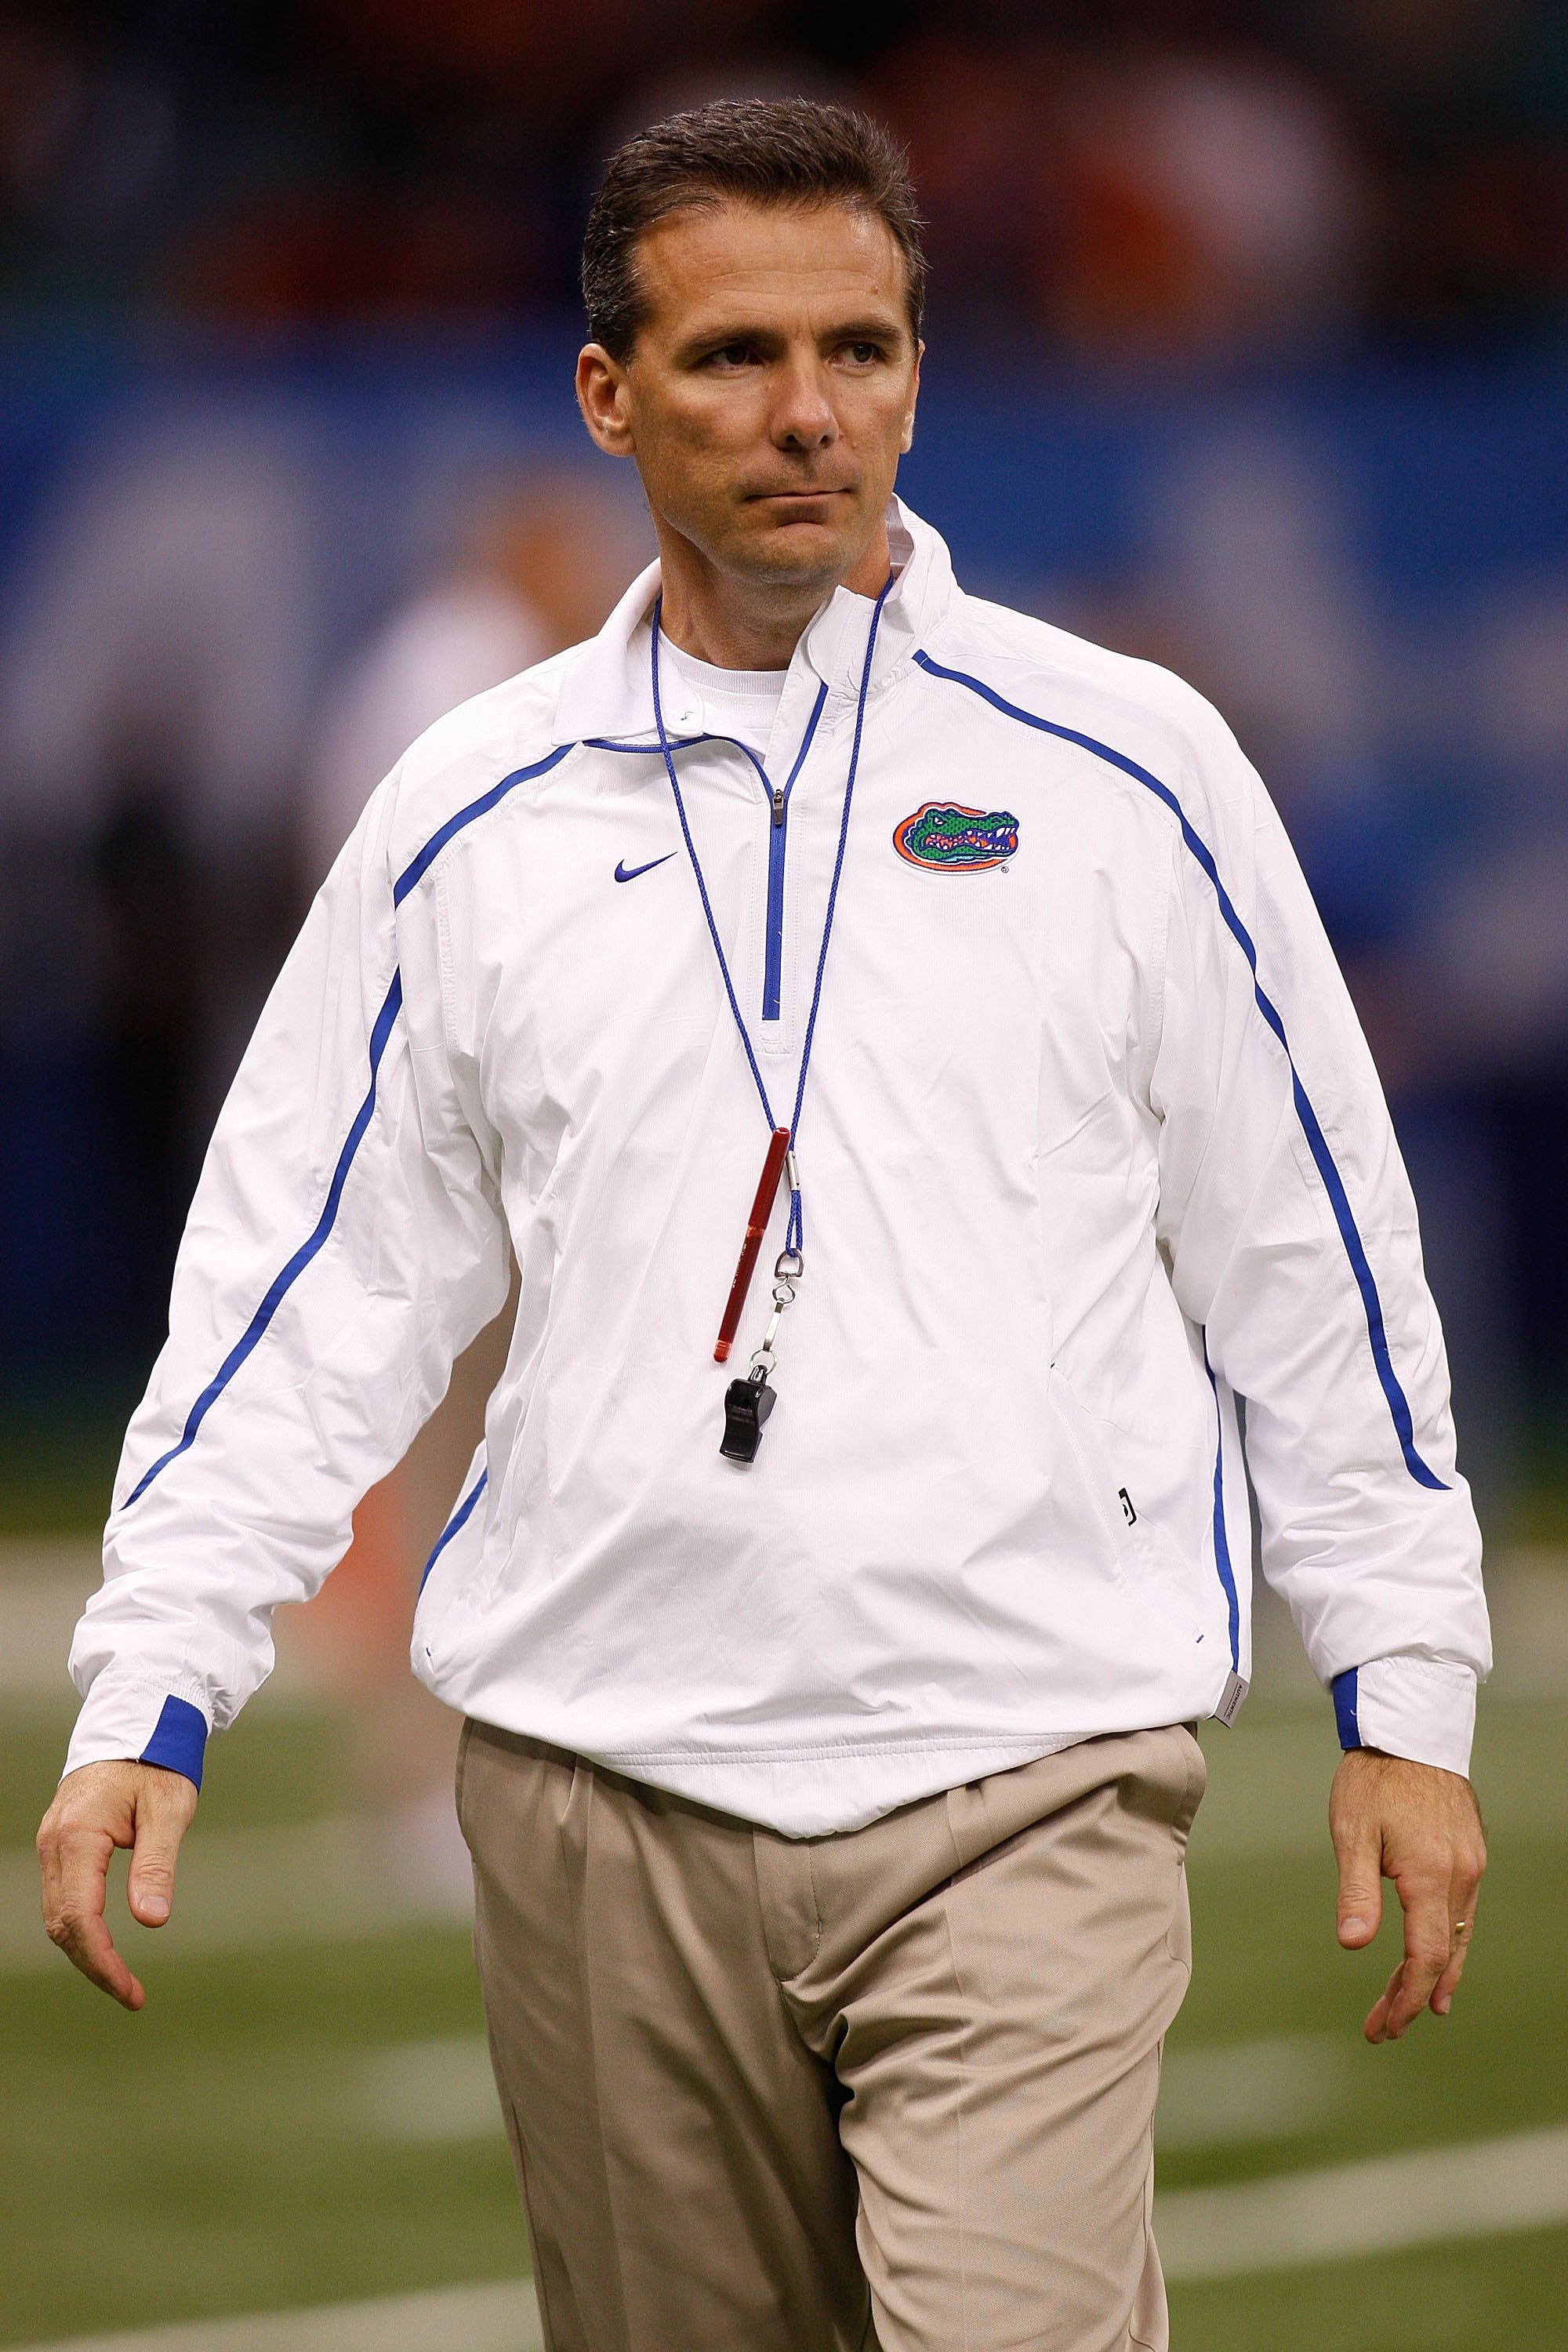 NEW ORLEANS - JANUARY 01:  Head coach Urban Meyer of the Florida Gators watches his team warm up before playing the Cincinnati Bearcats during the Allstate Sugar Bowl at the Louisana Superdome on January 1, 2010 in New Orleans, Louisiana.  (Photo by Chris